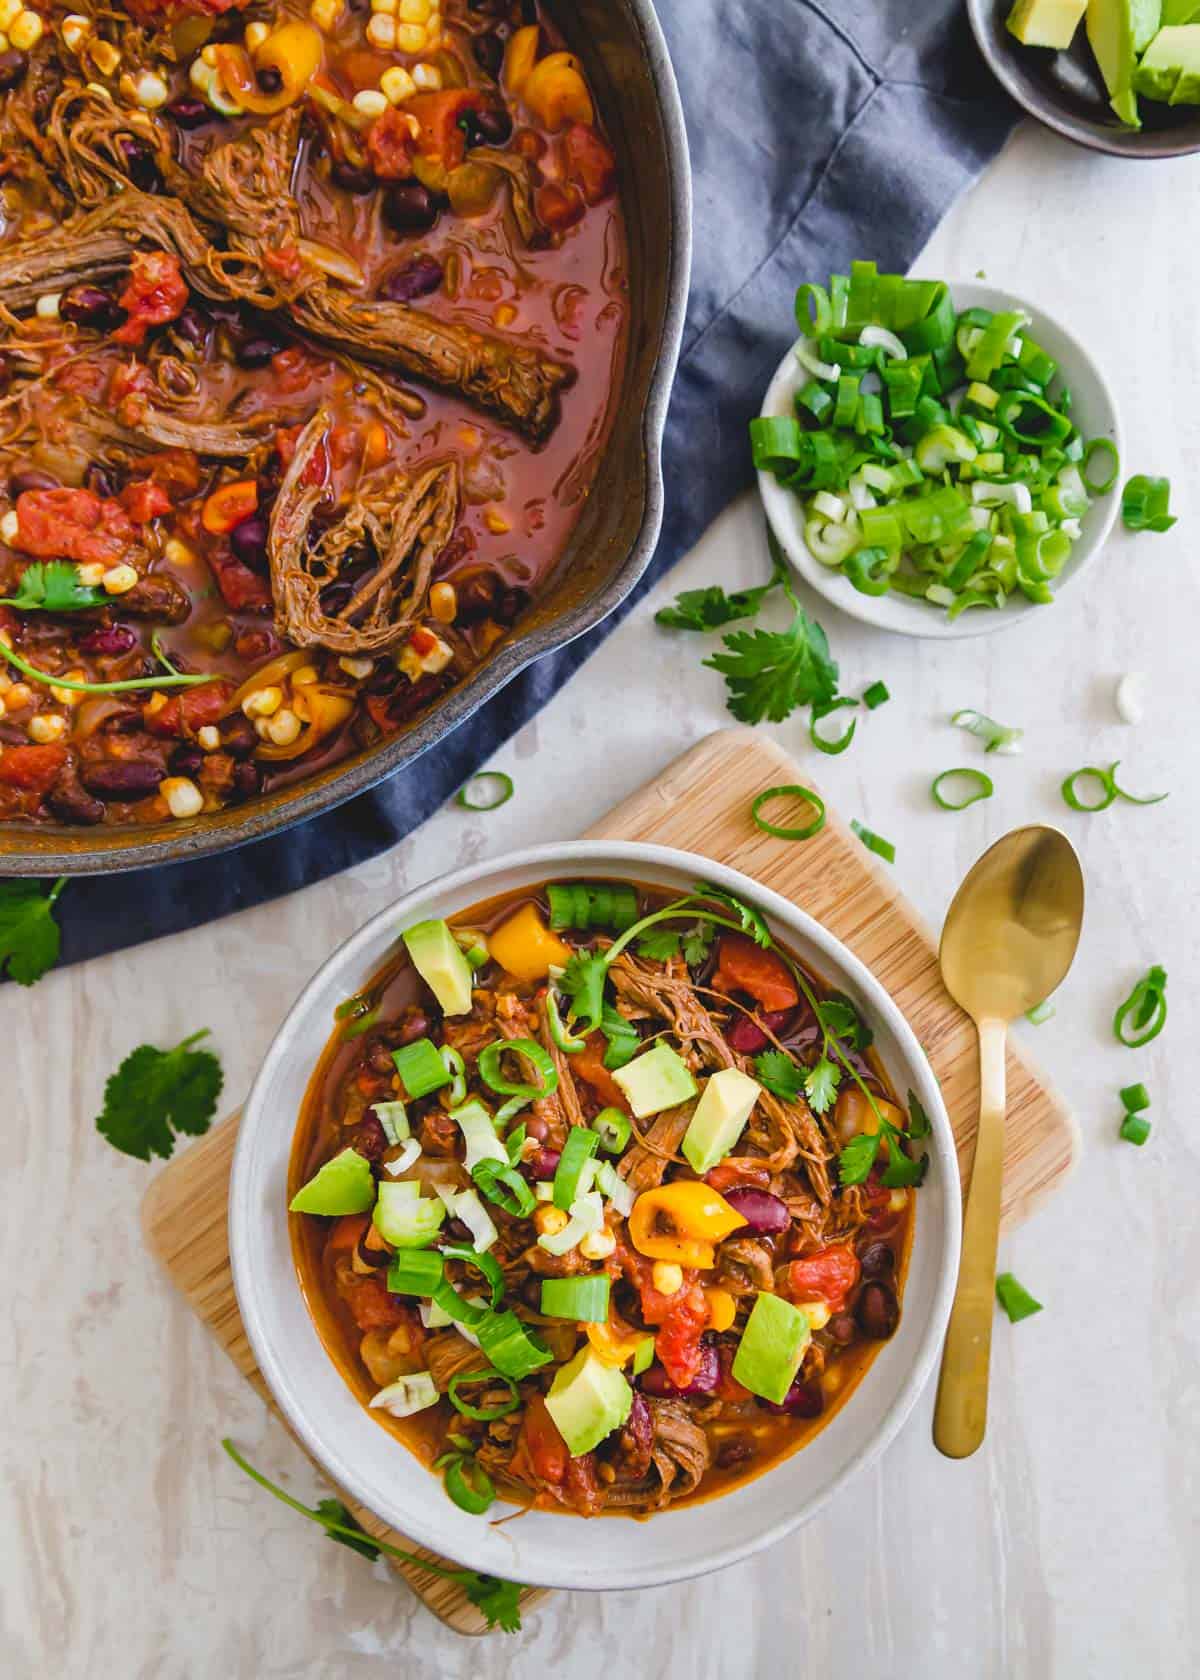 Meaty beef brisket chili is topped with avocado, cilantro and green onions.